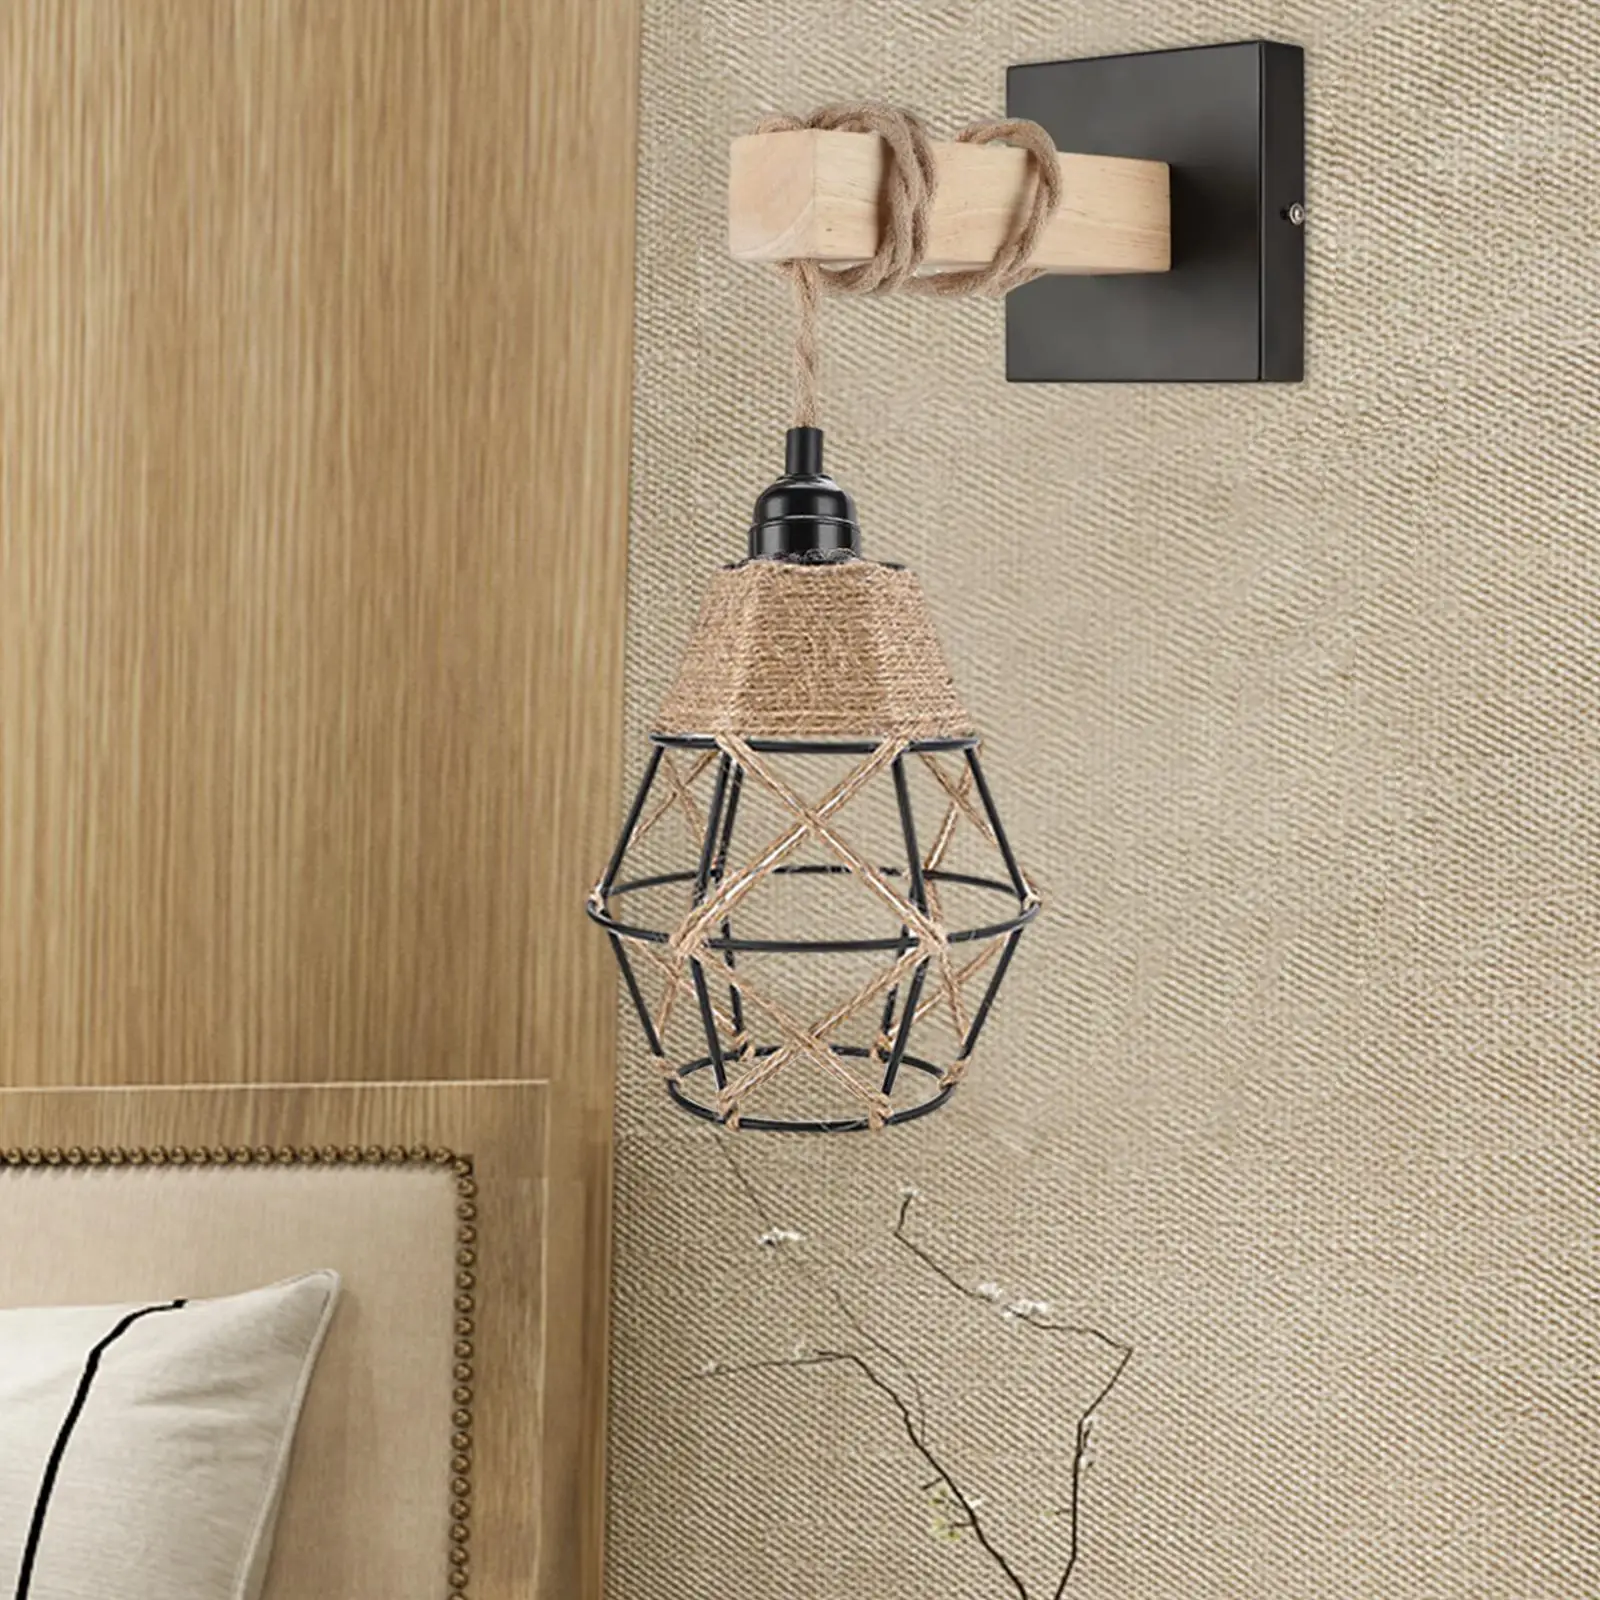 Wall Sconce Wall Mounted Lamp Decorative Farmhouse Wall Light Bedside Lamp for Restaurant Bedroom Reading Hallway Decor